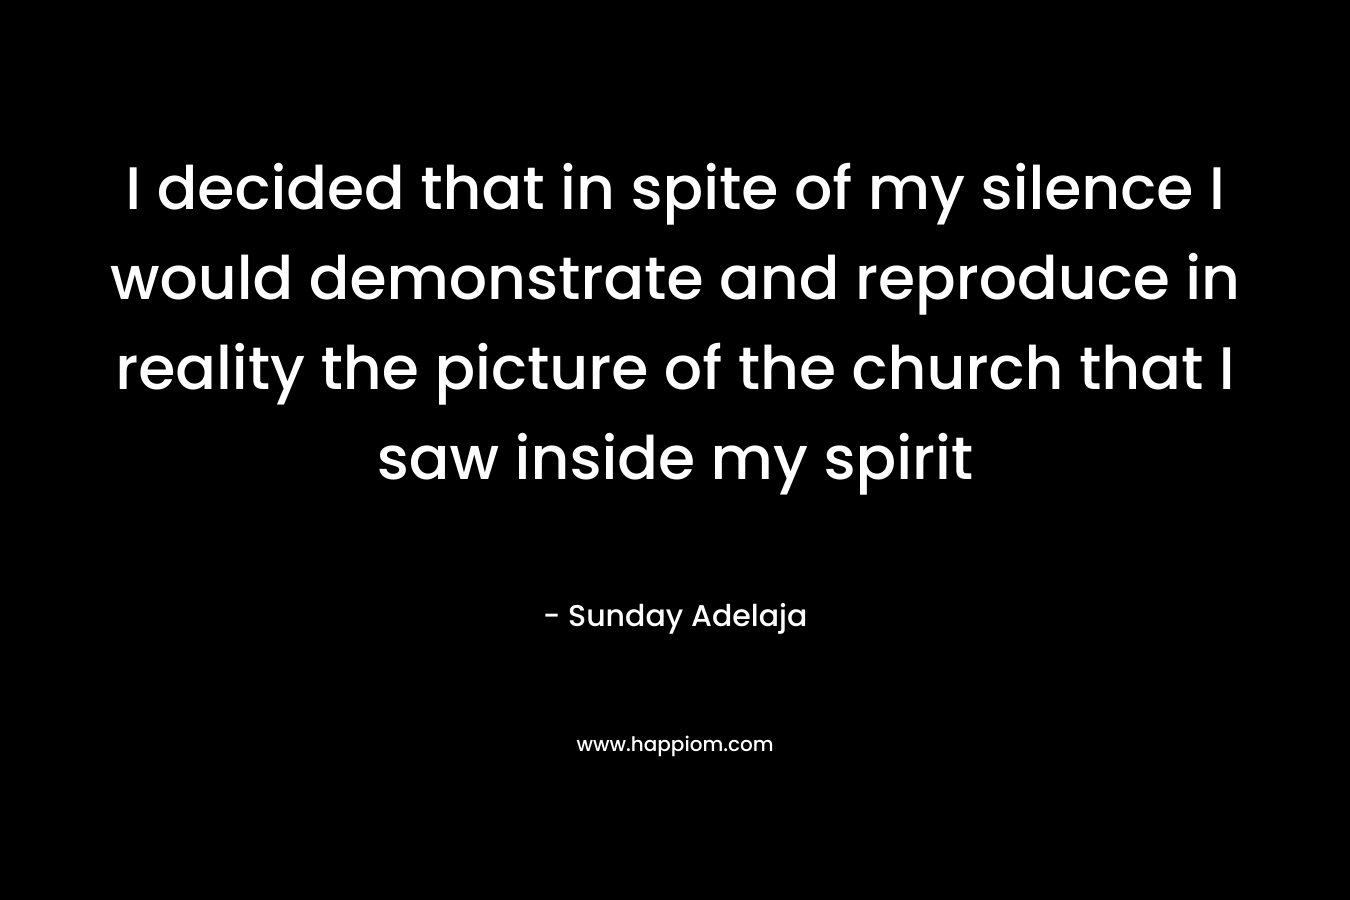 I decided that in spite of my silence I would demonstrate and reproduce in reality the picture of the church that I saw inside my spirit – Sunday Adelaja